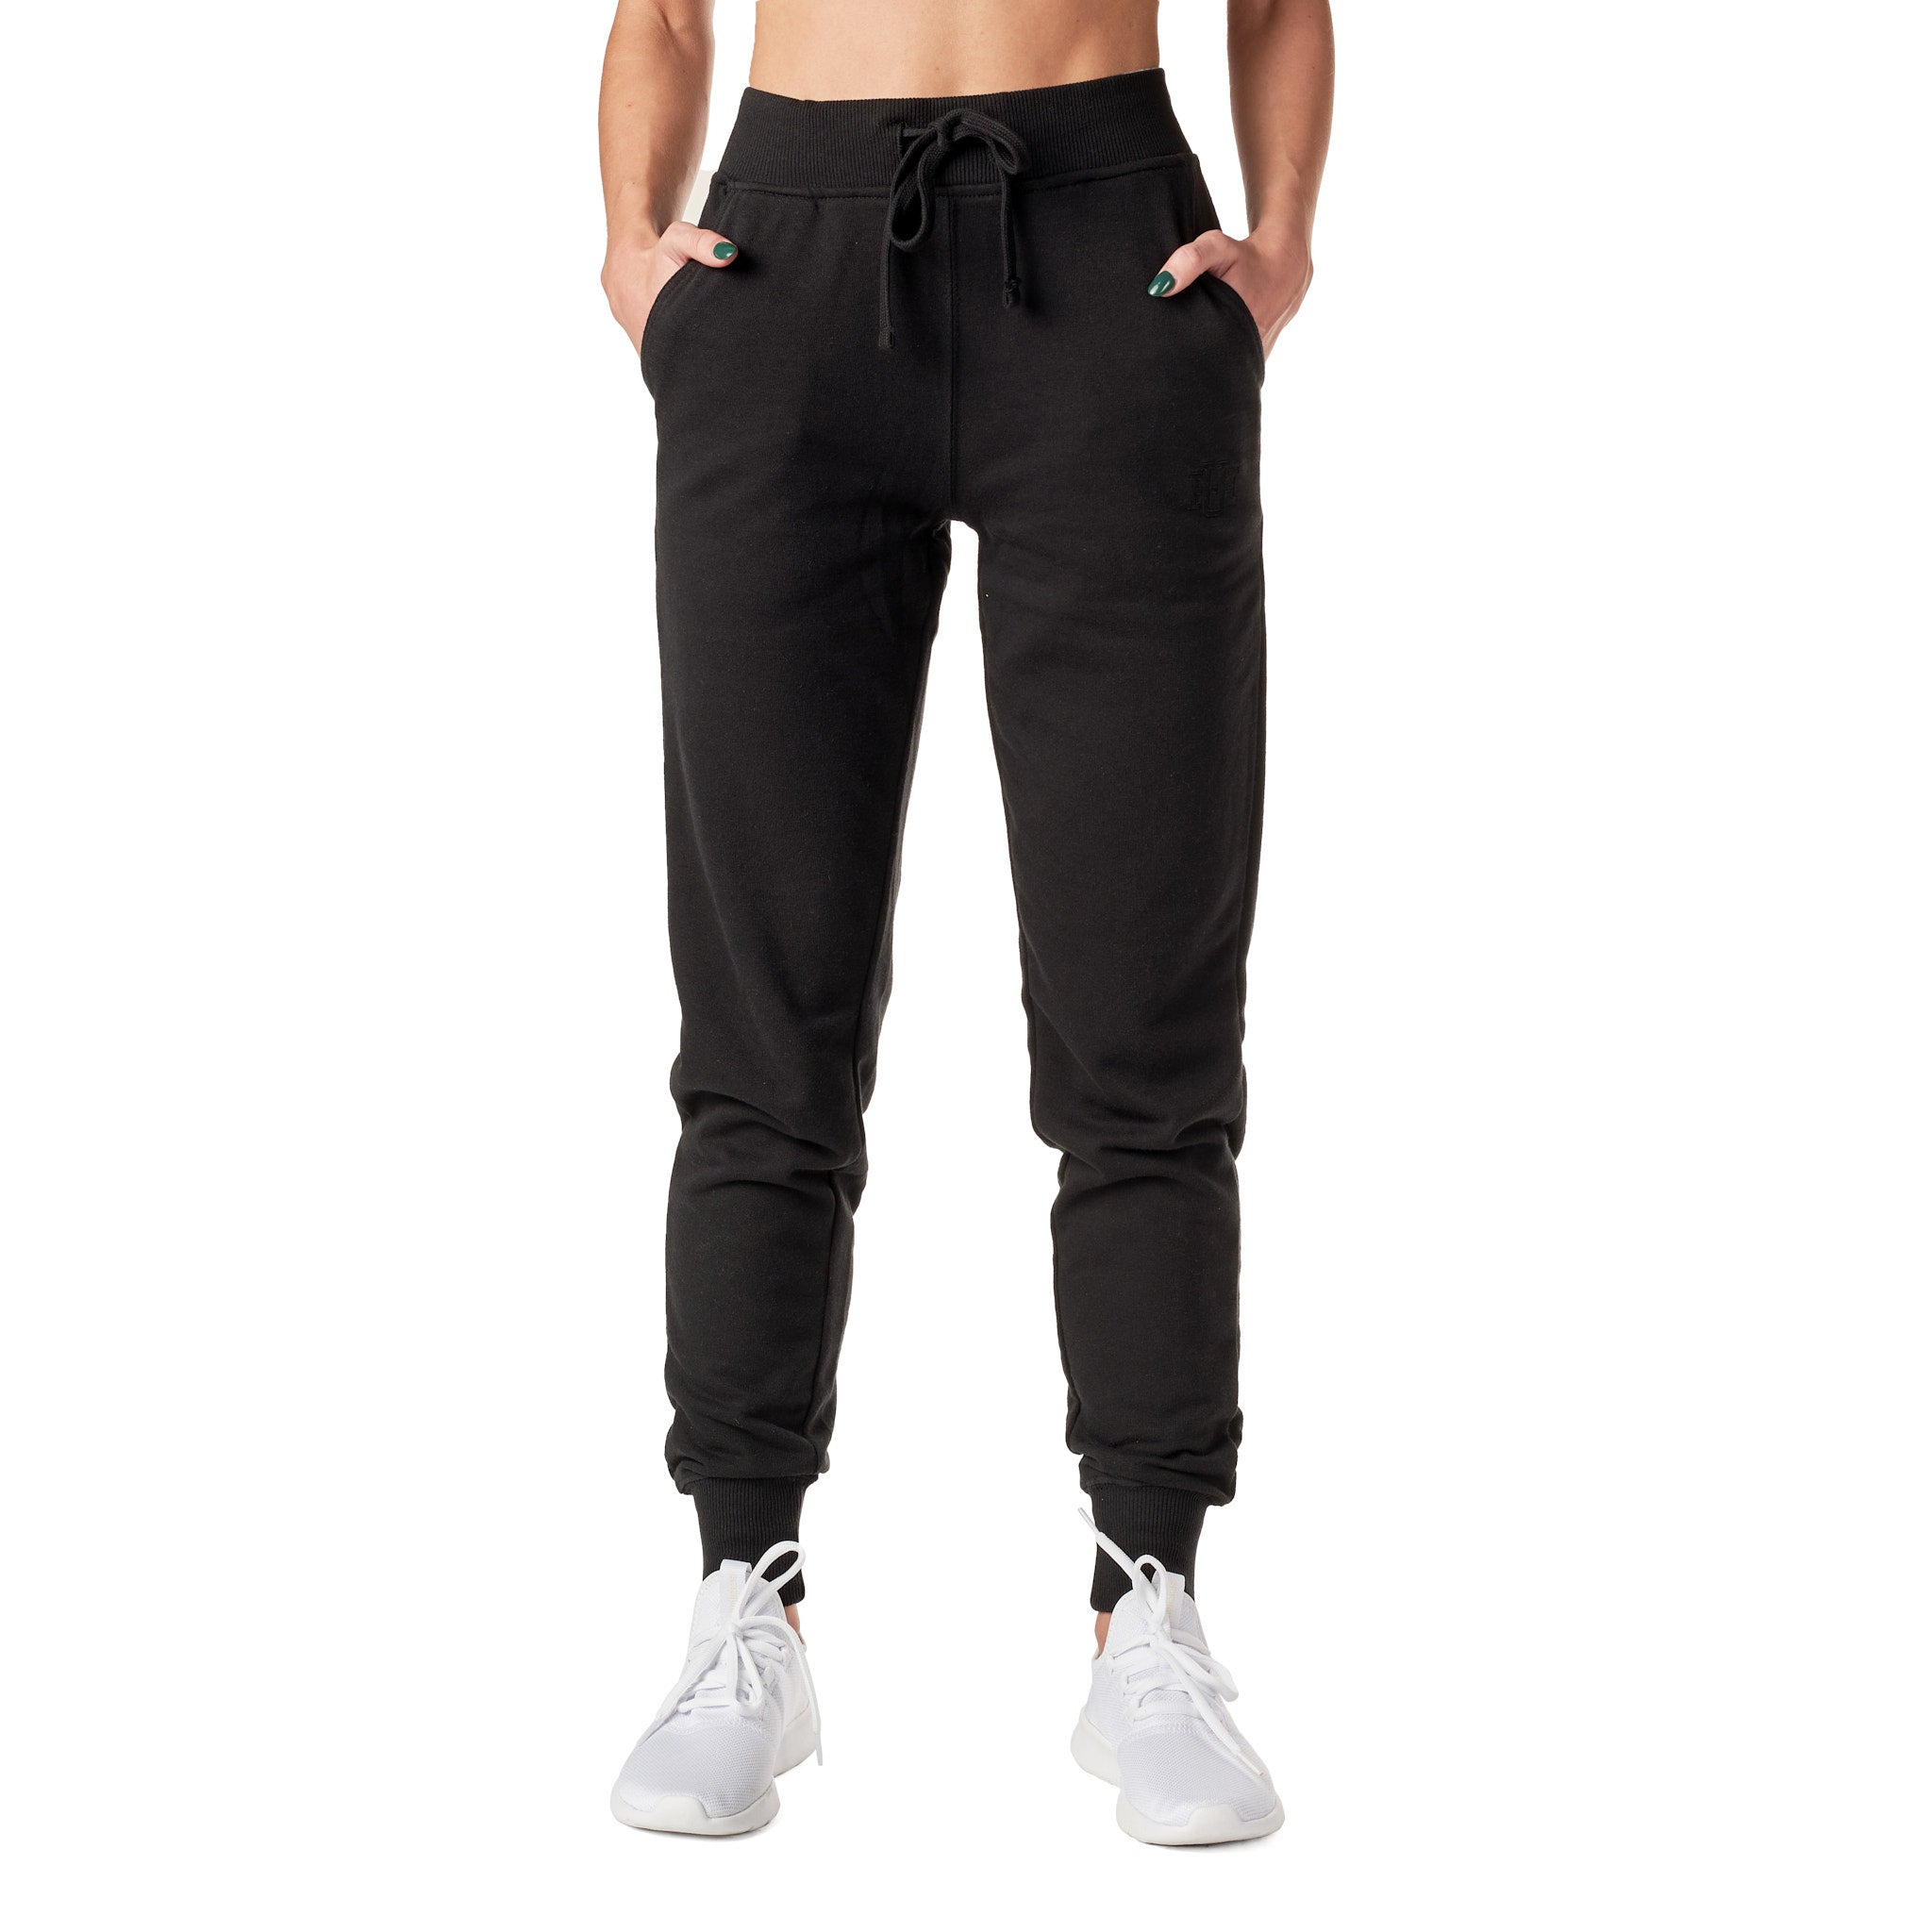 Elevate Comfort, Elevate Style, High Sole Joggers for Women